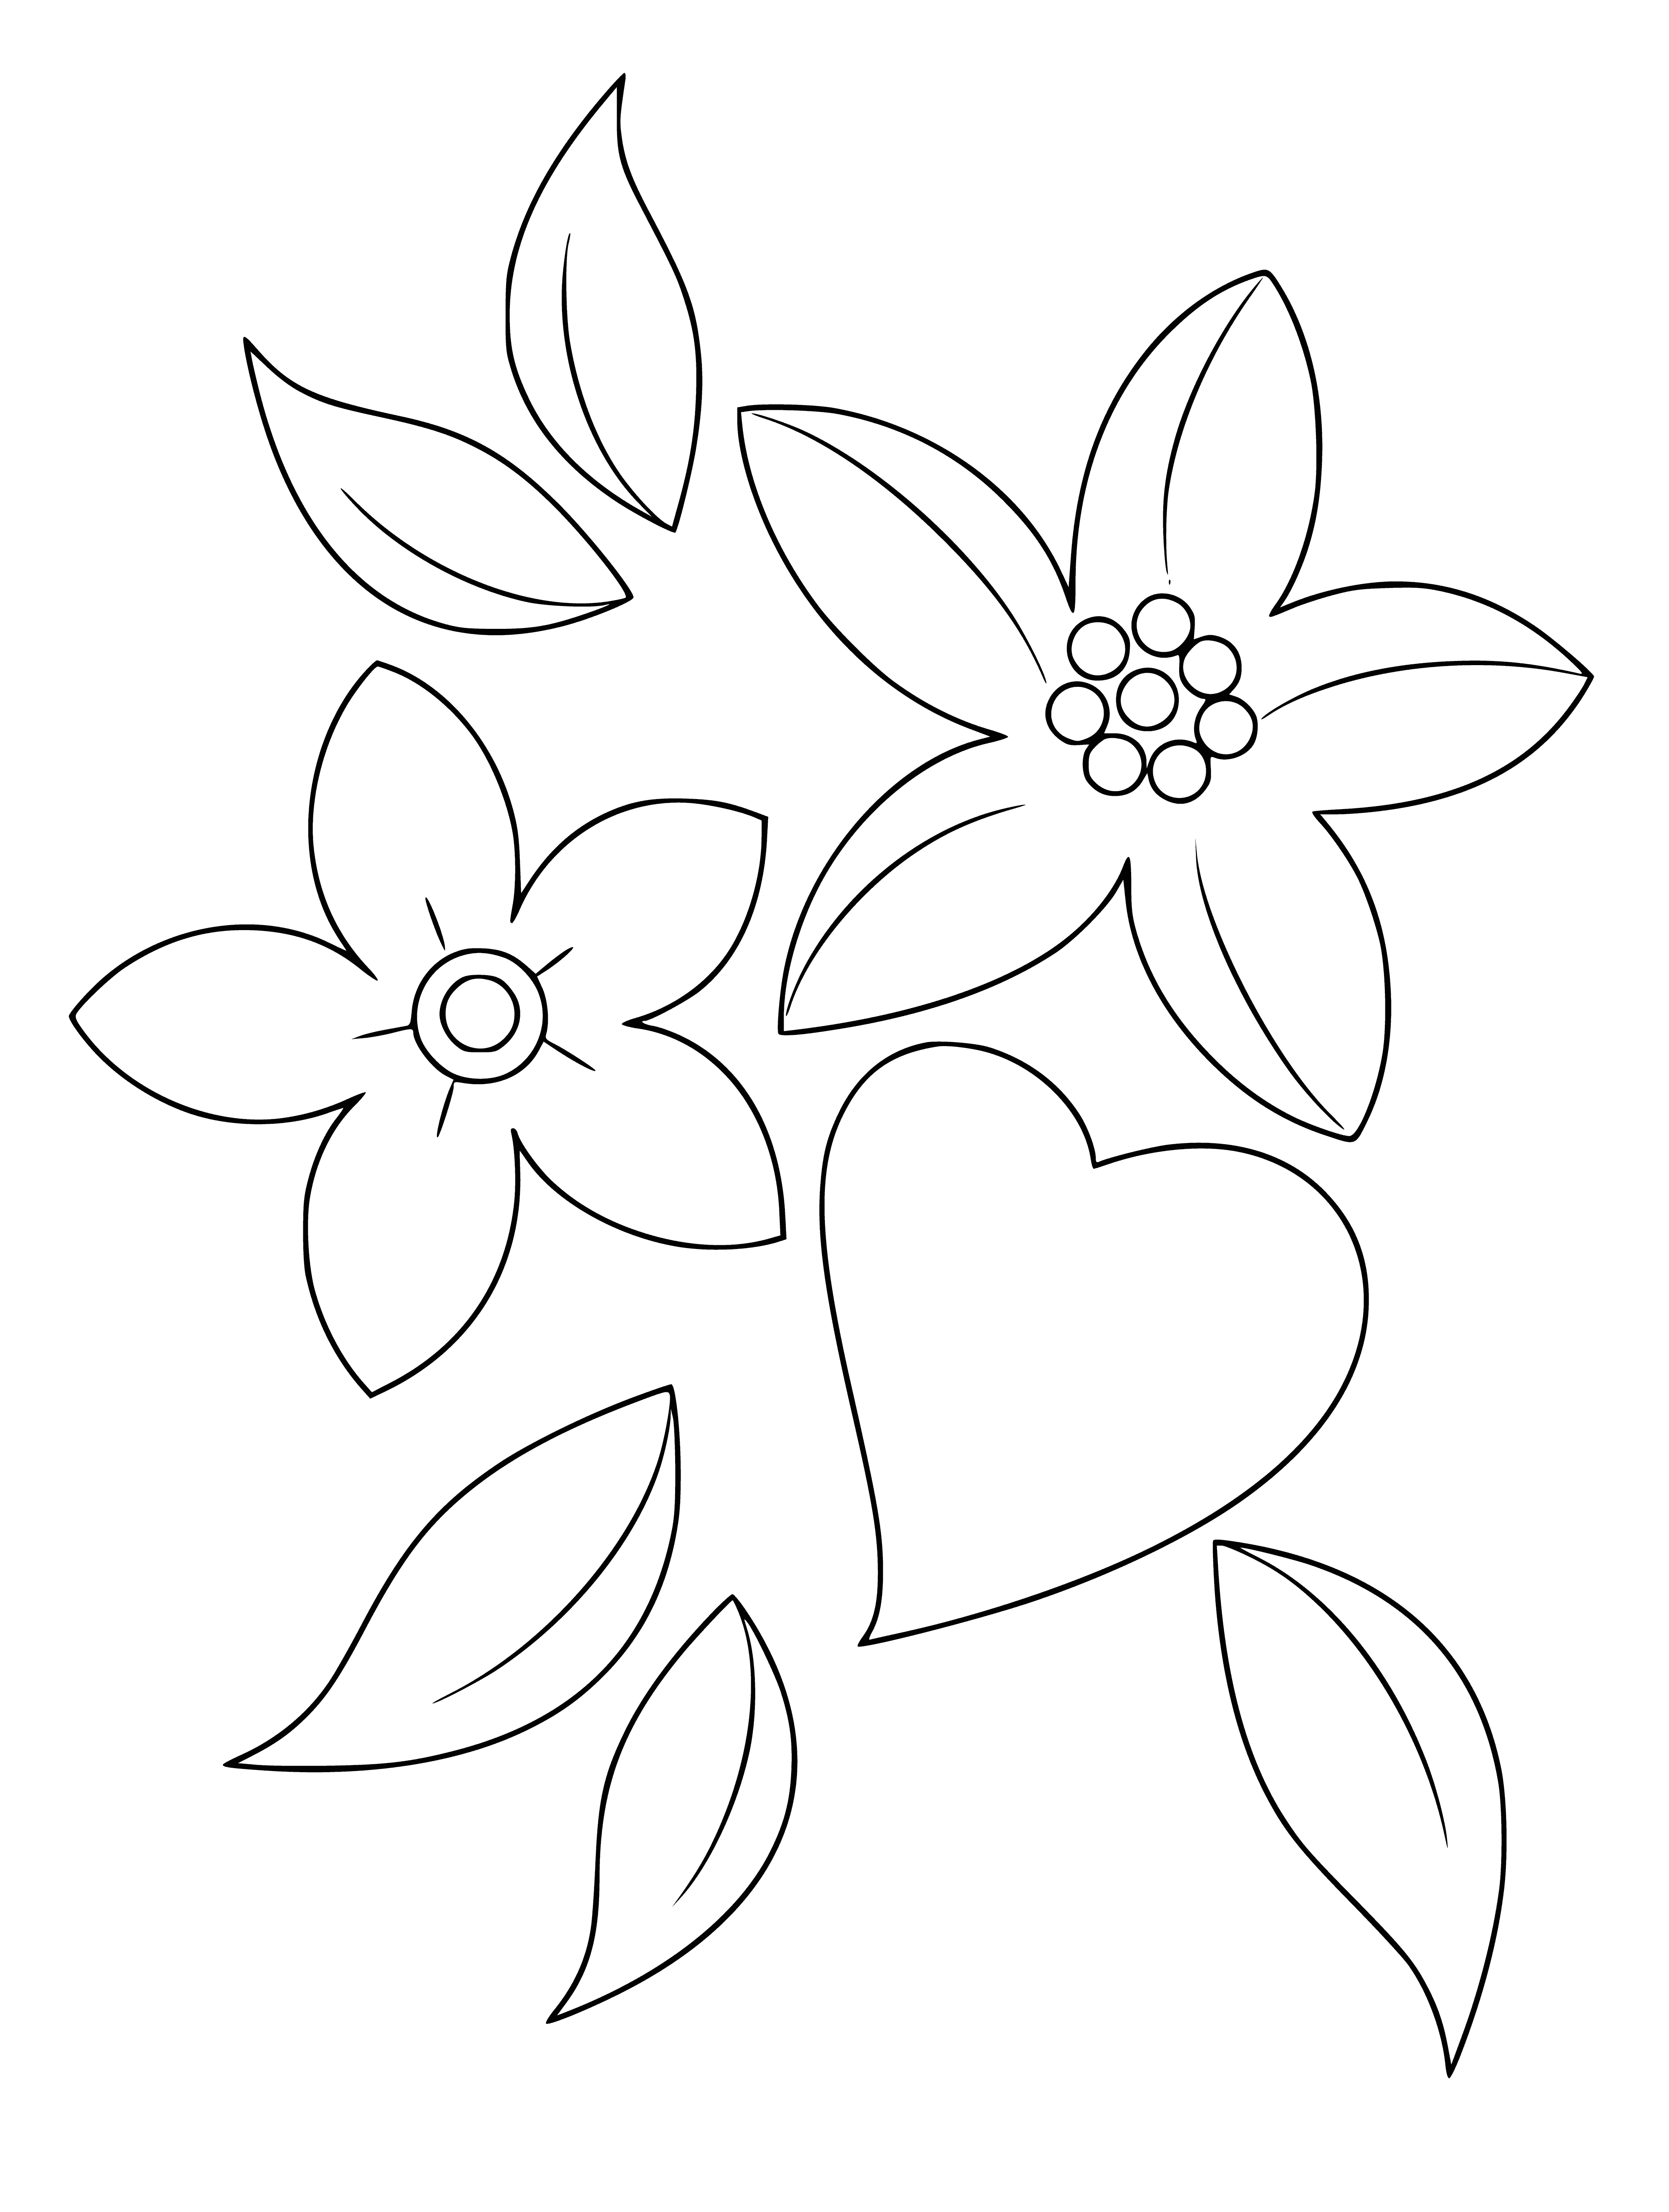 coloring page: A large red heart surrounded by flowers, with smaller hearts scattered around it.